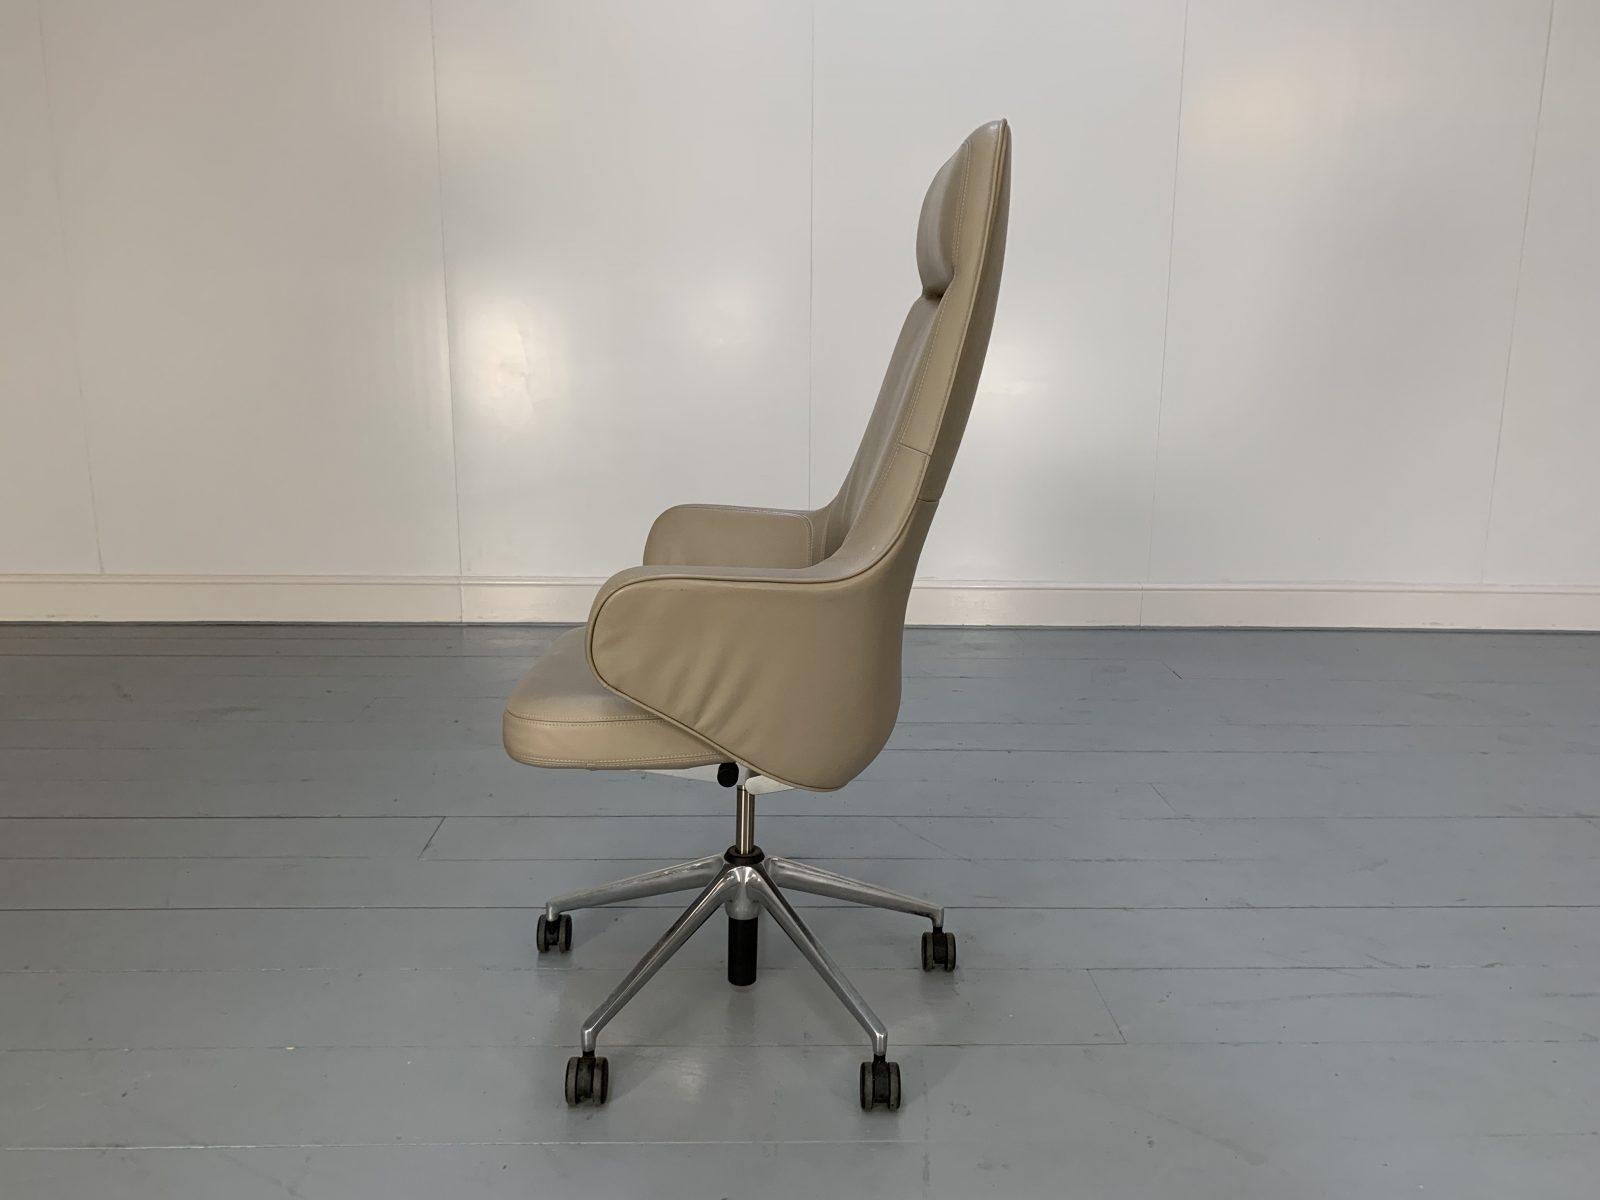 Vitra “Grand Executive” Office Armchair Chair in “Premium” Sand Leather 1